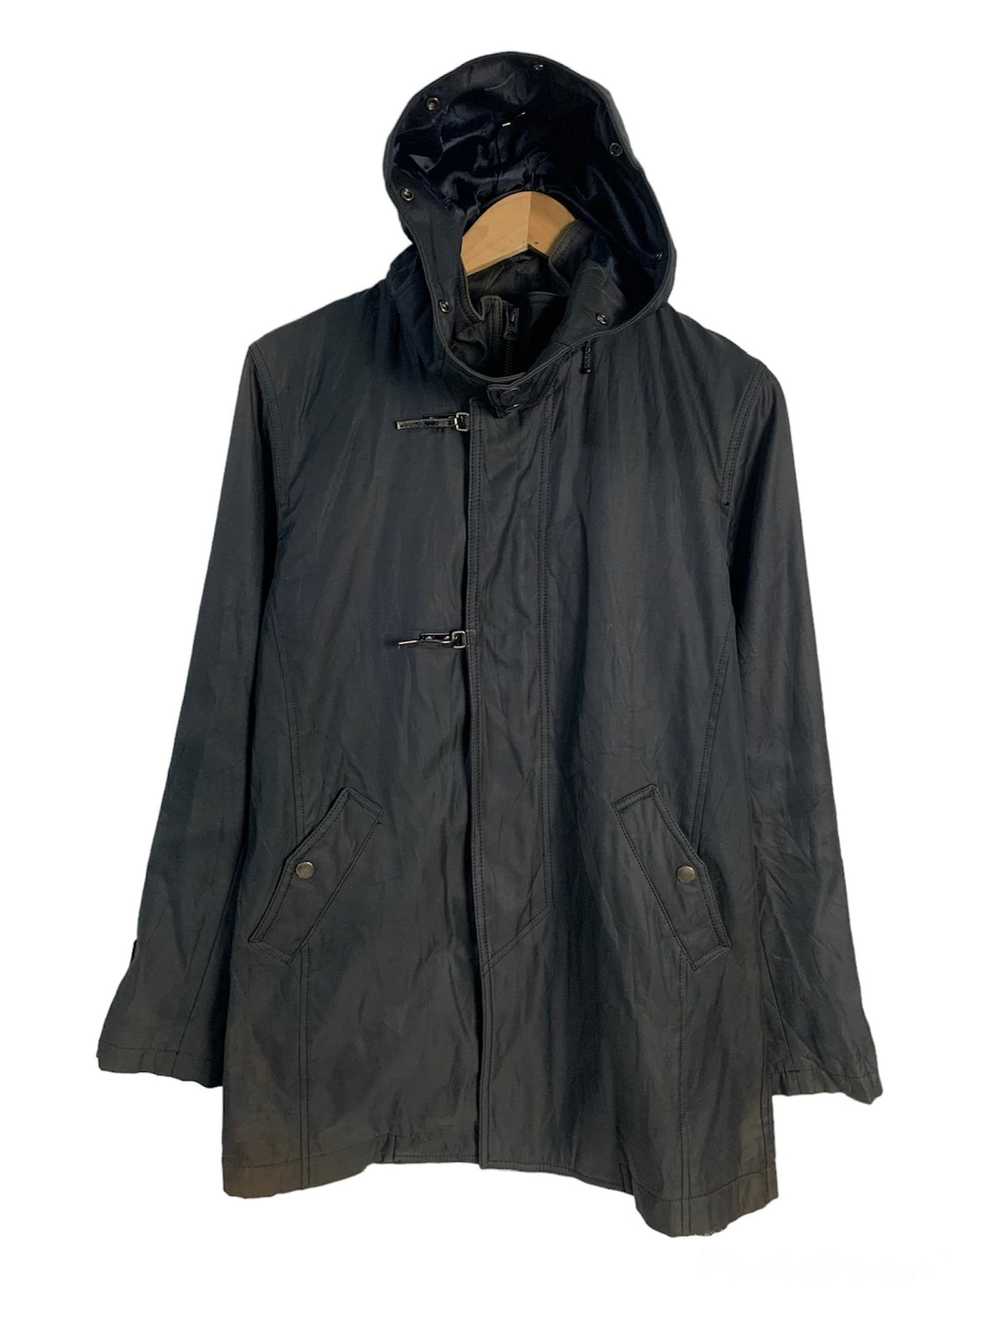 Tete Homme Tete Homme Hooded Jacket - image 1